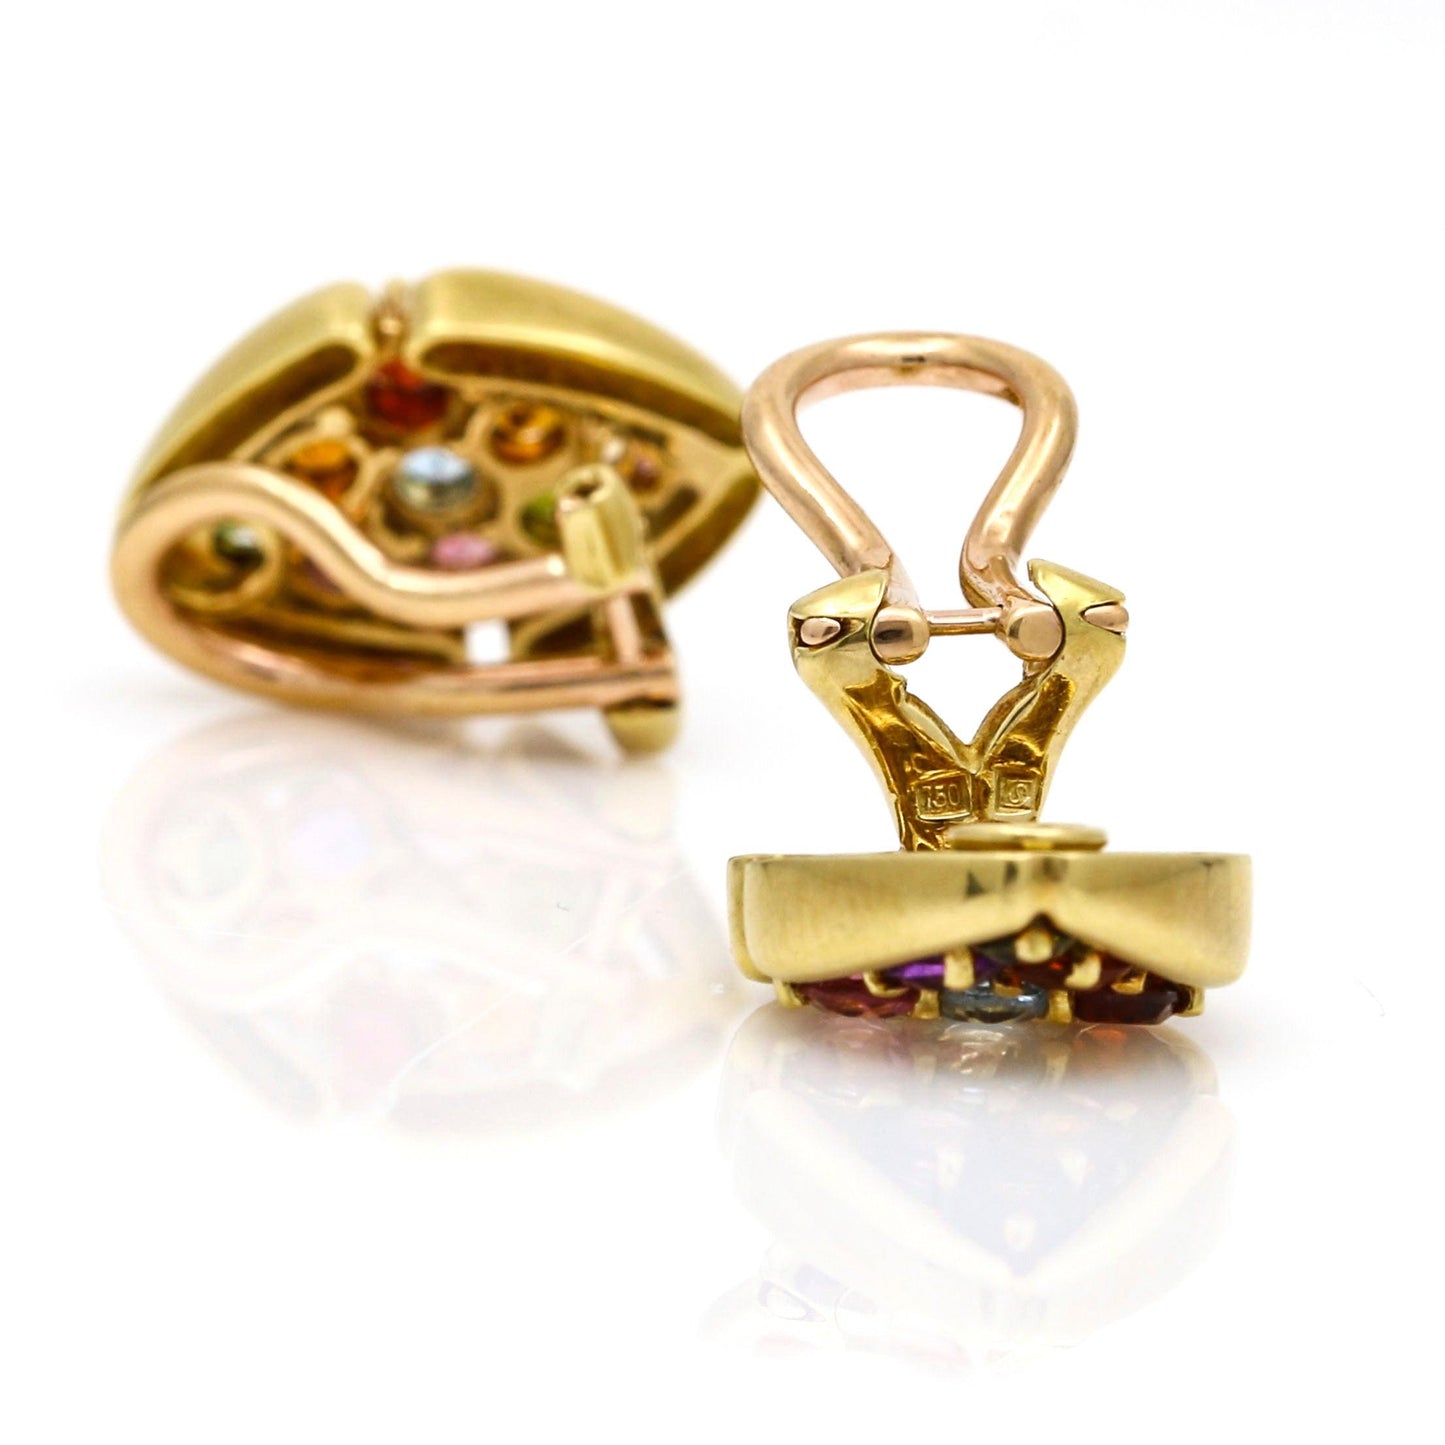 H Stern Multi-Color Gemstone Clip On Earrings in 18k Yellow Gold - 31 Jewels Inc.